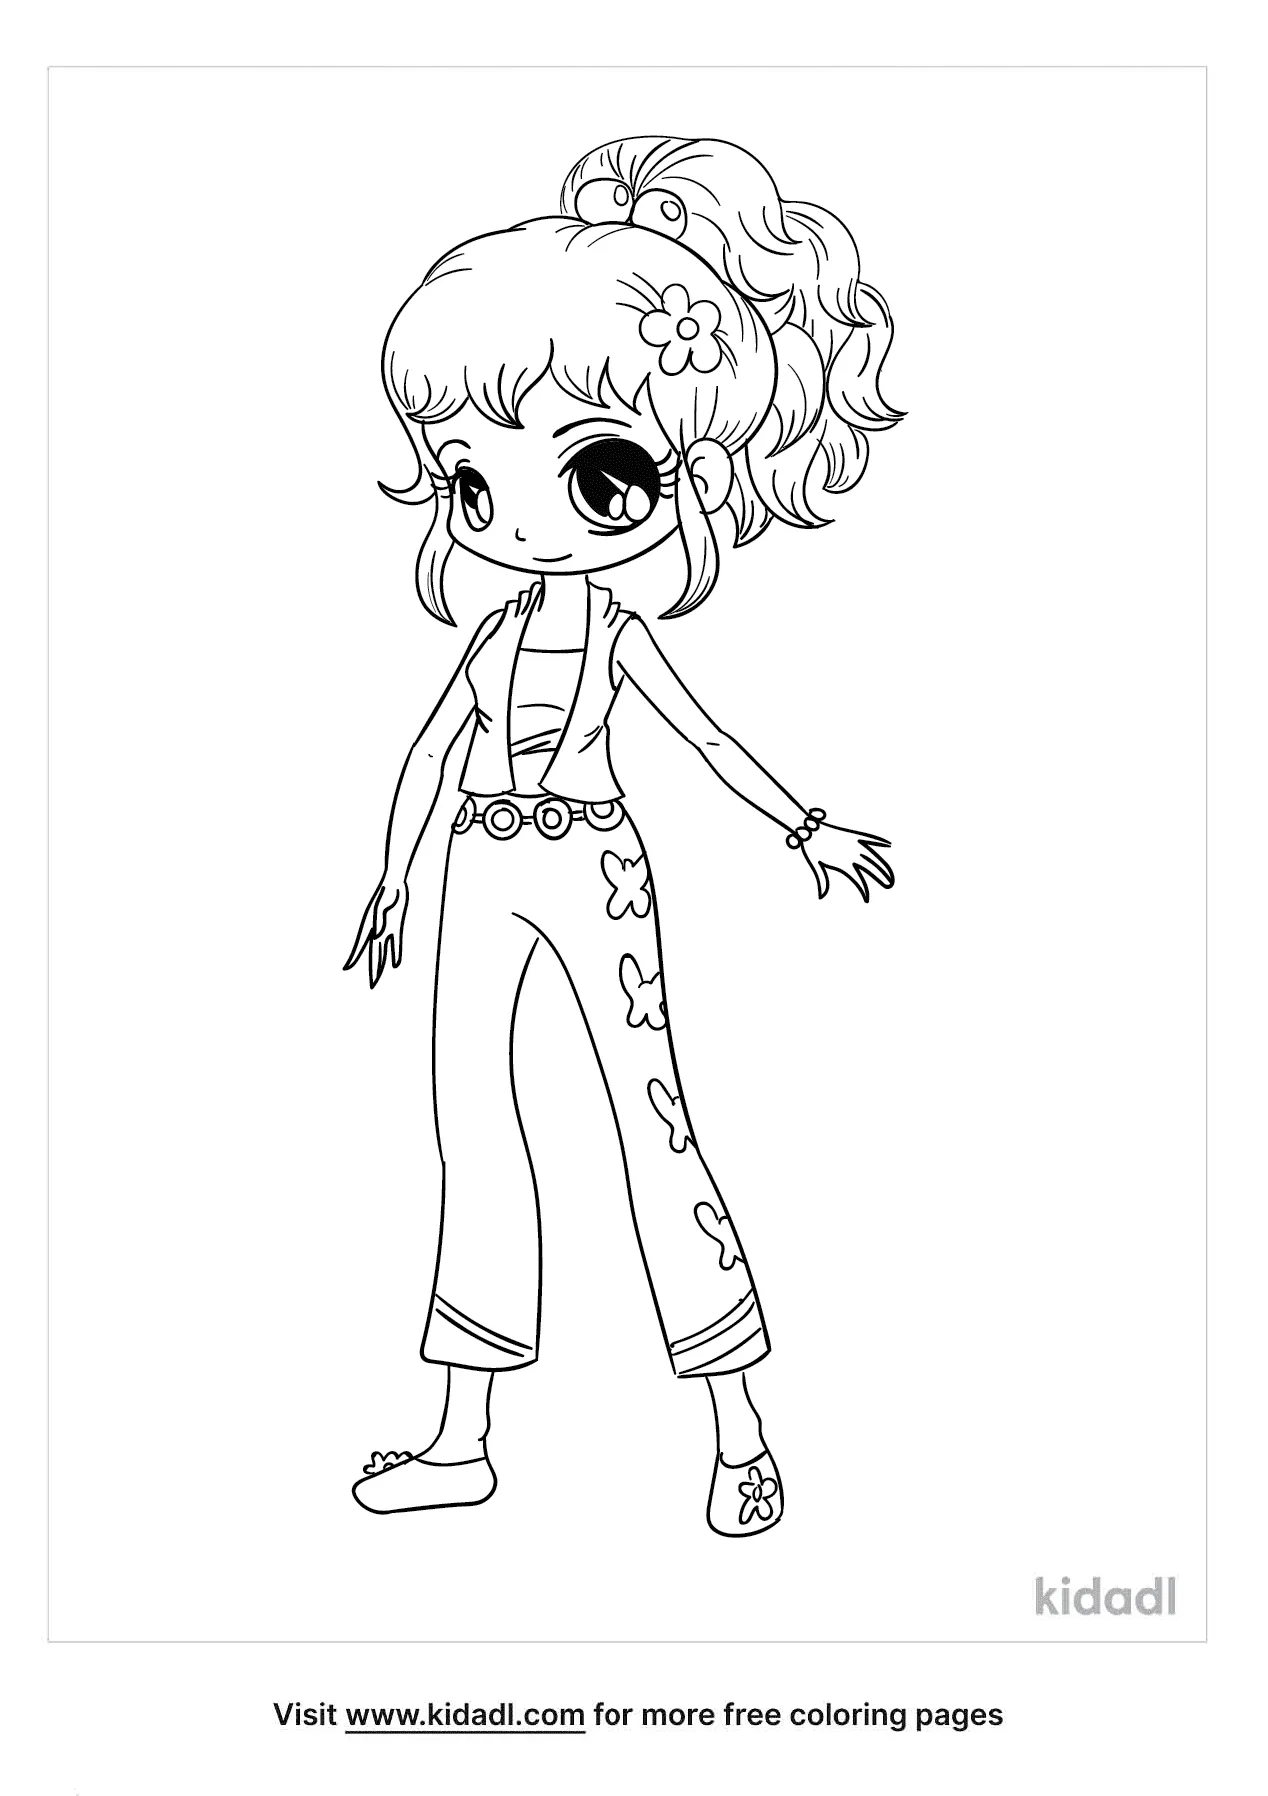 Free Anime Character Coloring Page | Coloring Page Printables | Kidadl